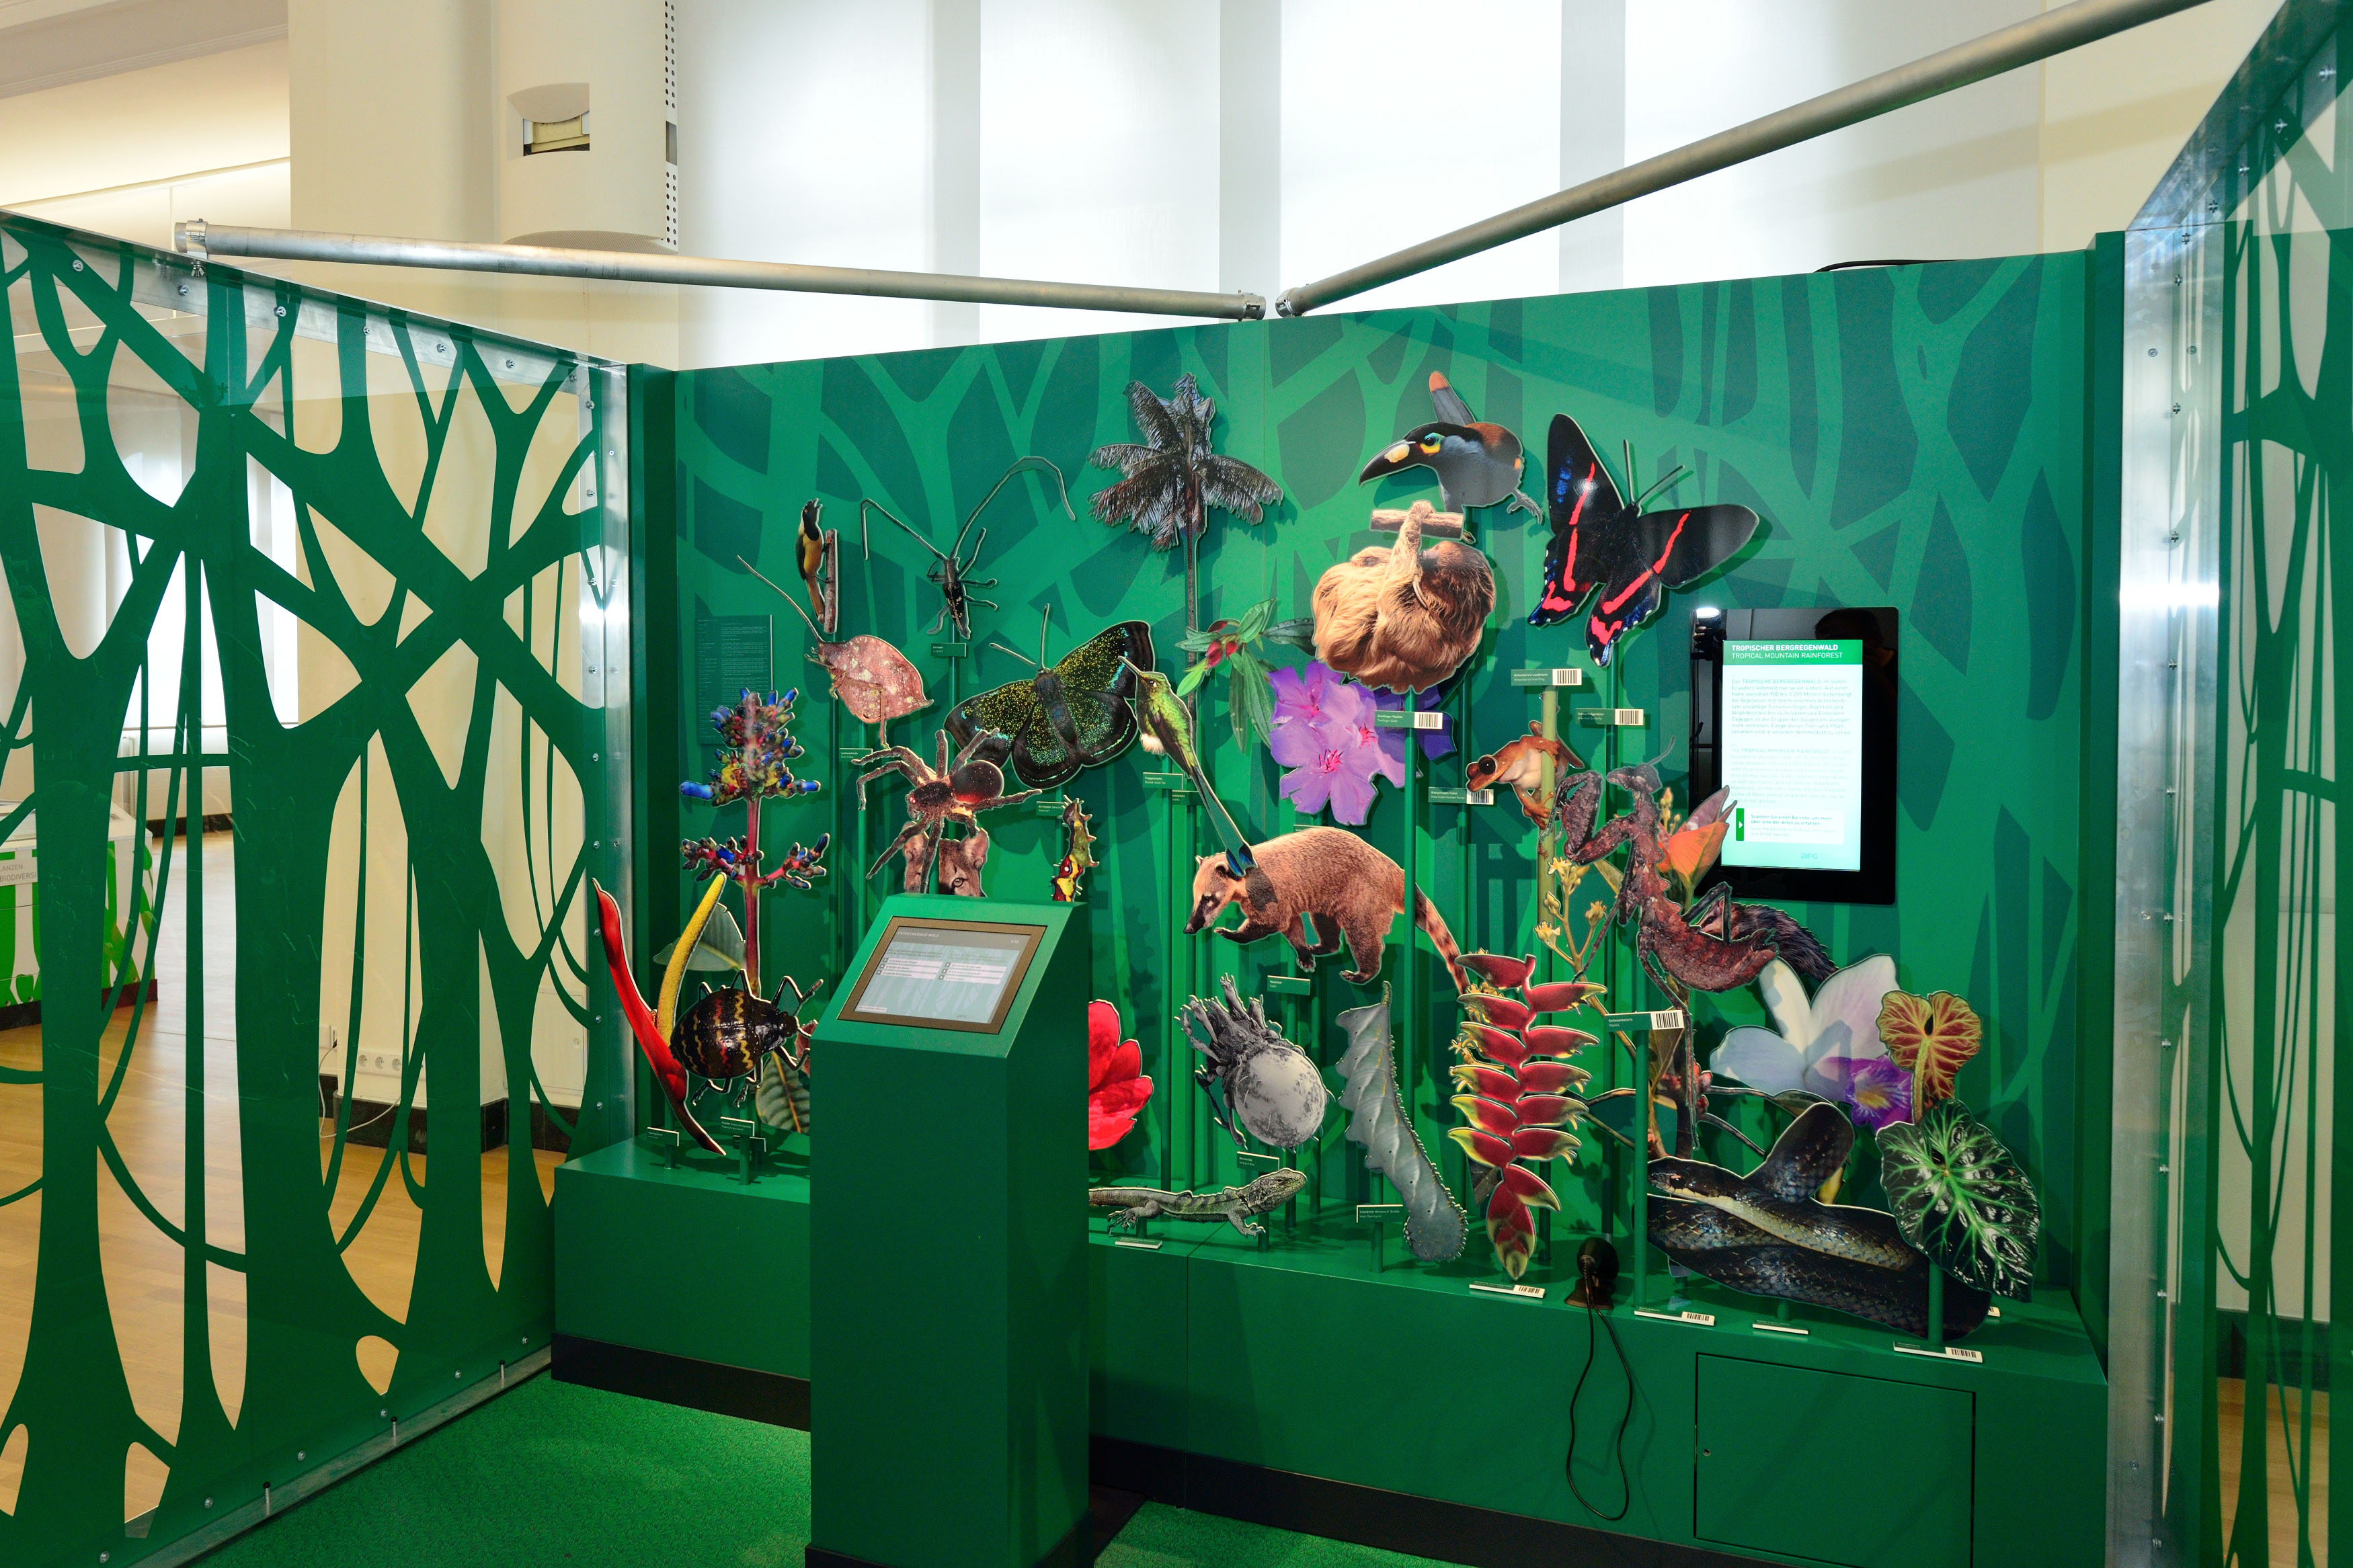 From the exhibition "DIVERSITY MATTERS! - An Expedition Through Biodiversity" - Colourful diversity: forest habitats are brimming with life.